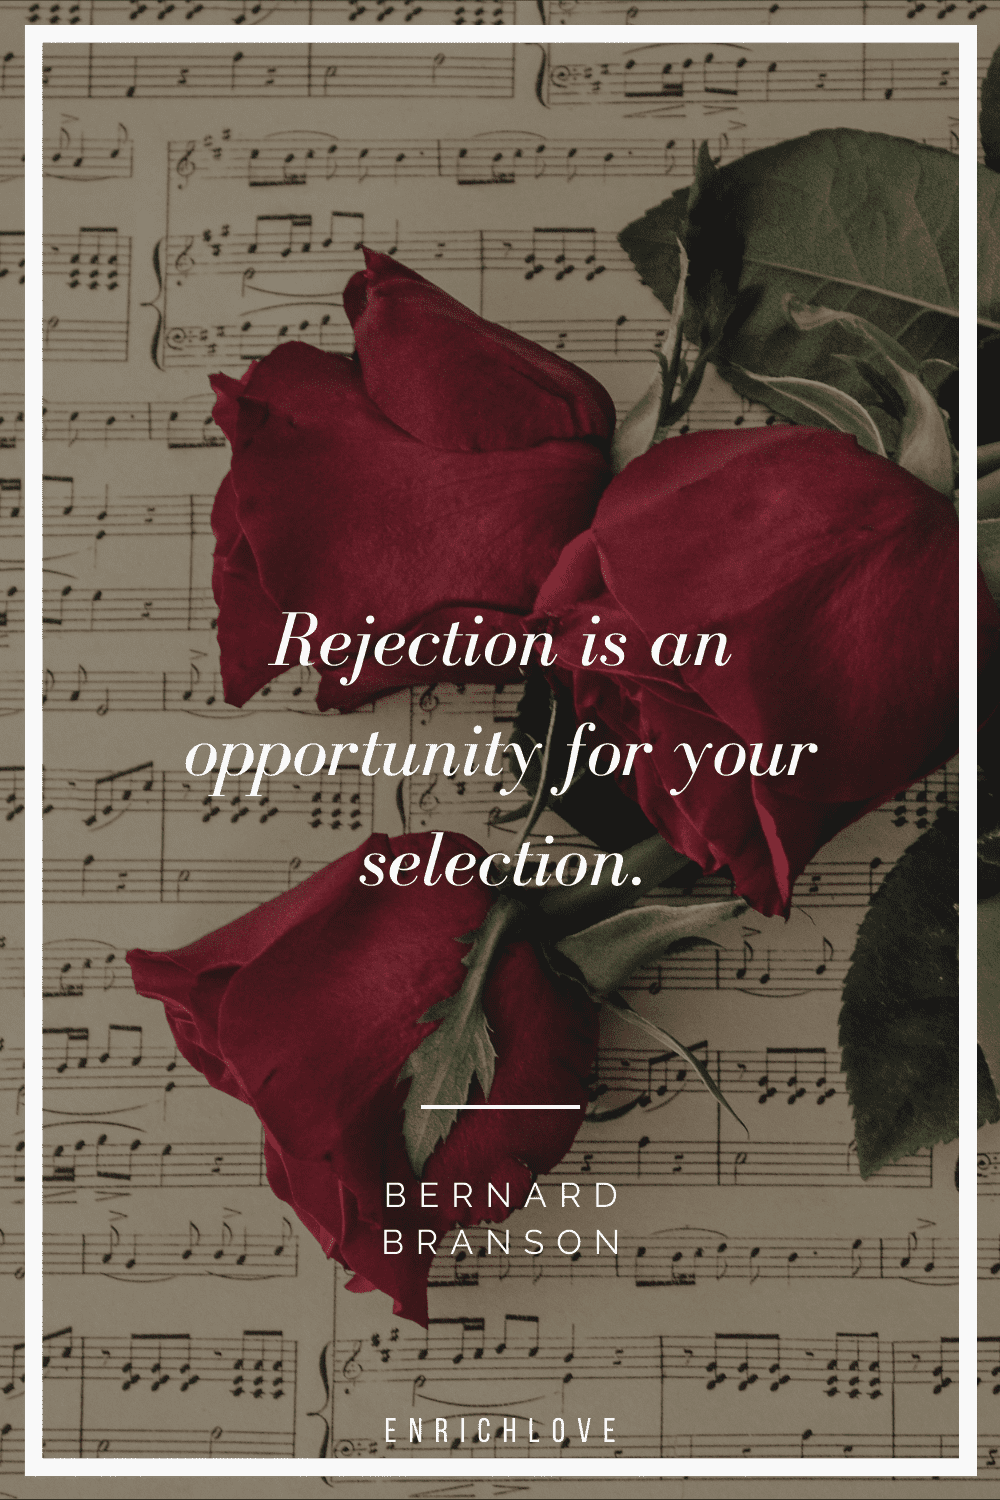 Rejection is an opportunity for your selection.